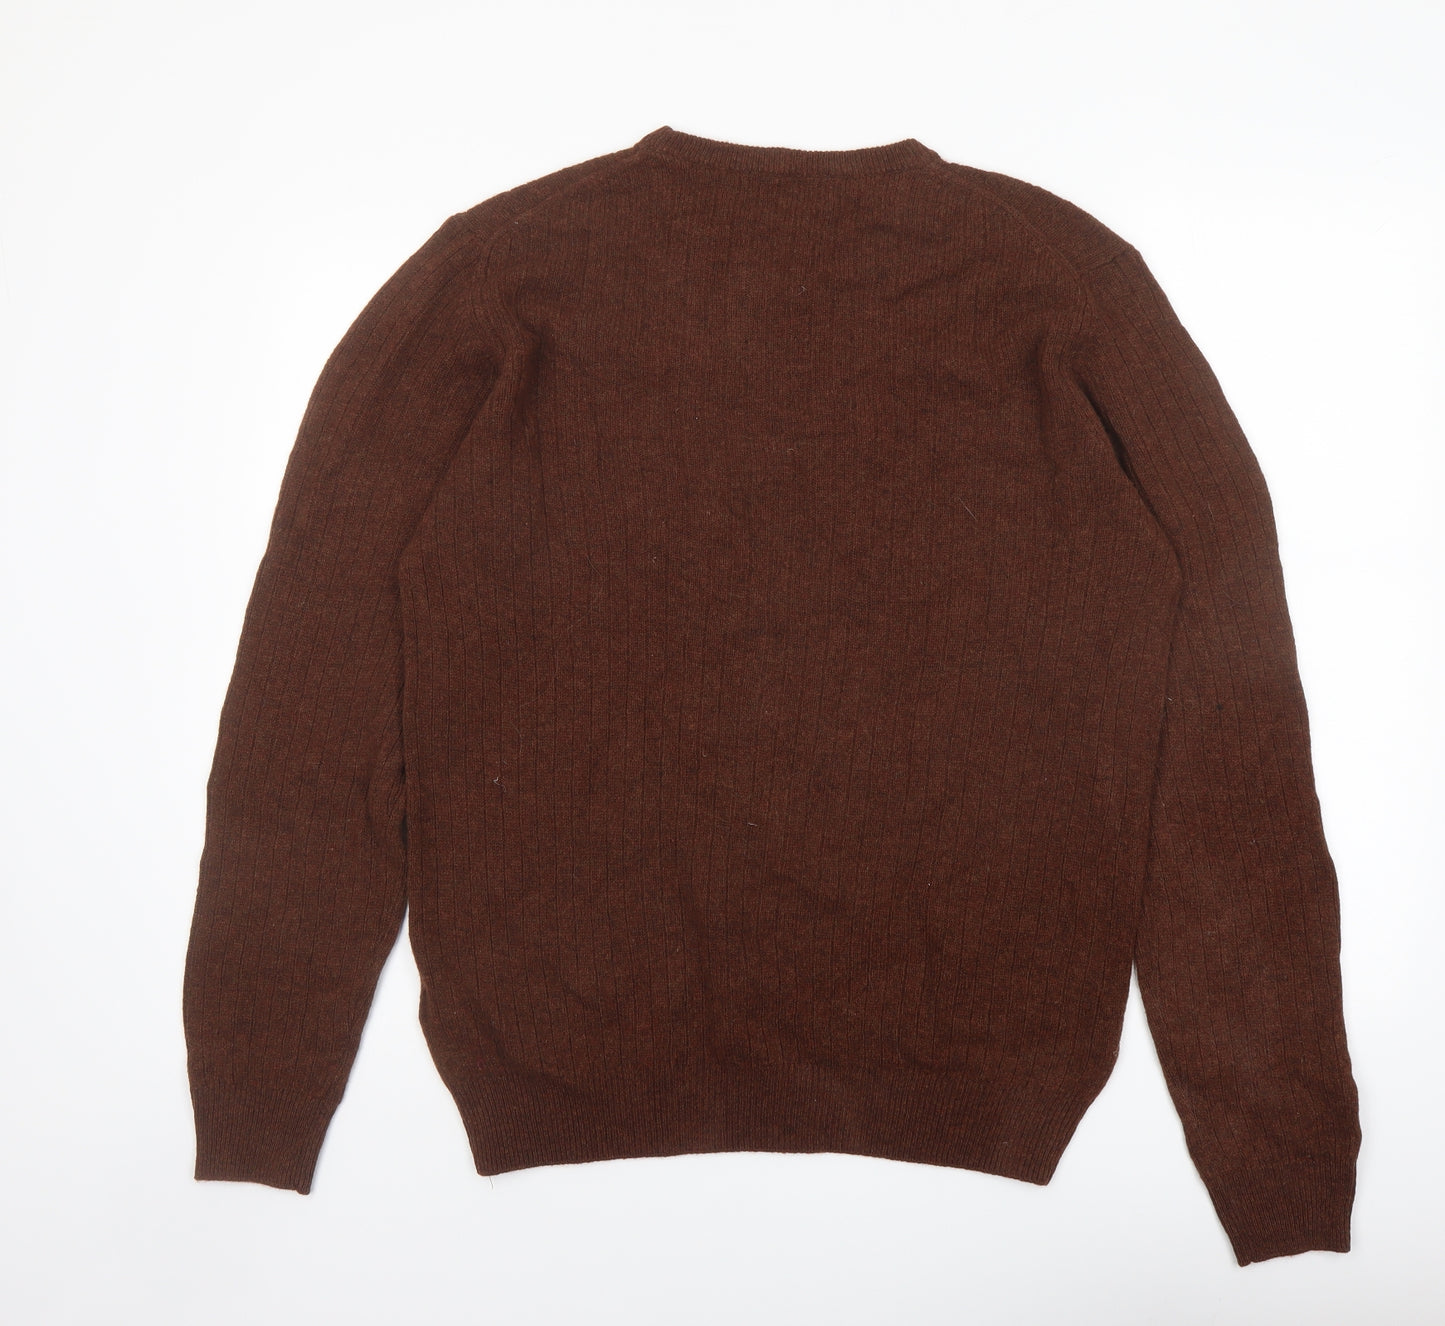 Marks and Spencer Mens Brown Round Neck Wool Pullover Jumper Size L Long Sleeve